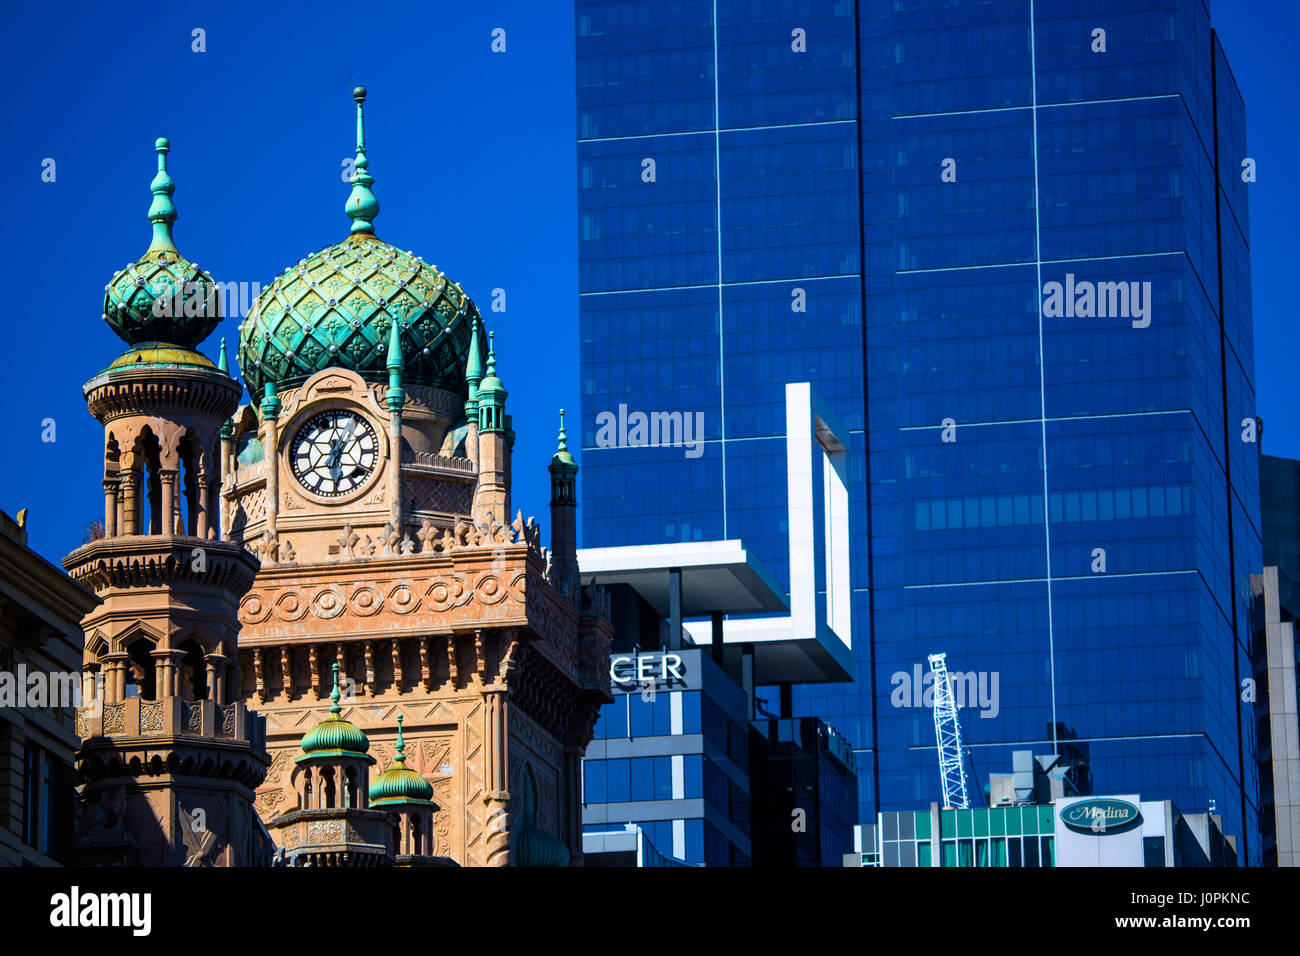 The clock tower of the Forum Theatre set against an office tower block in central Melbourne, Australia Stock Photo